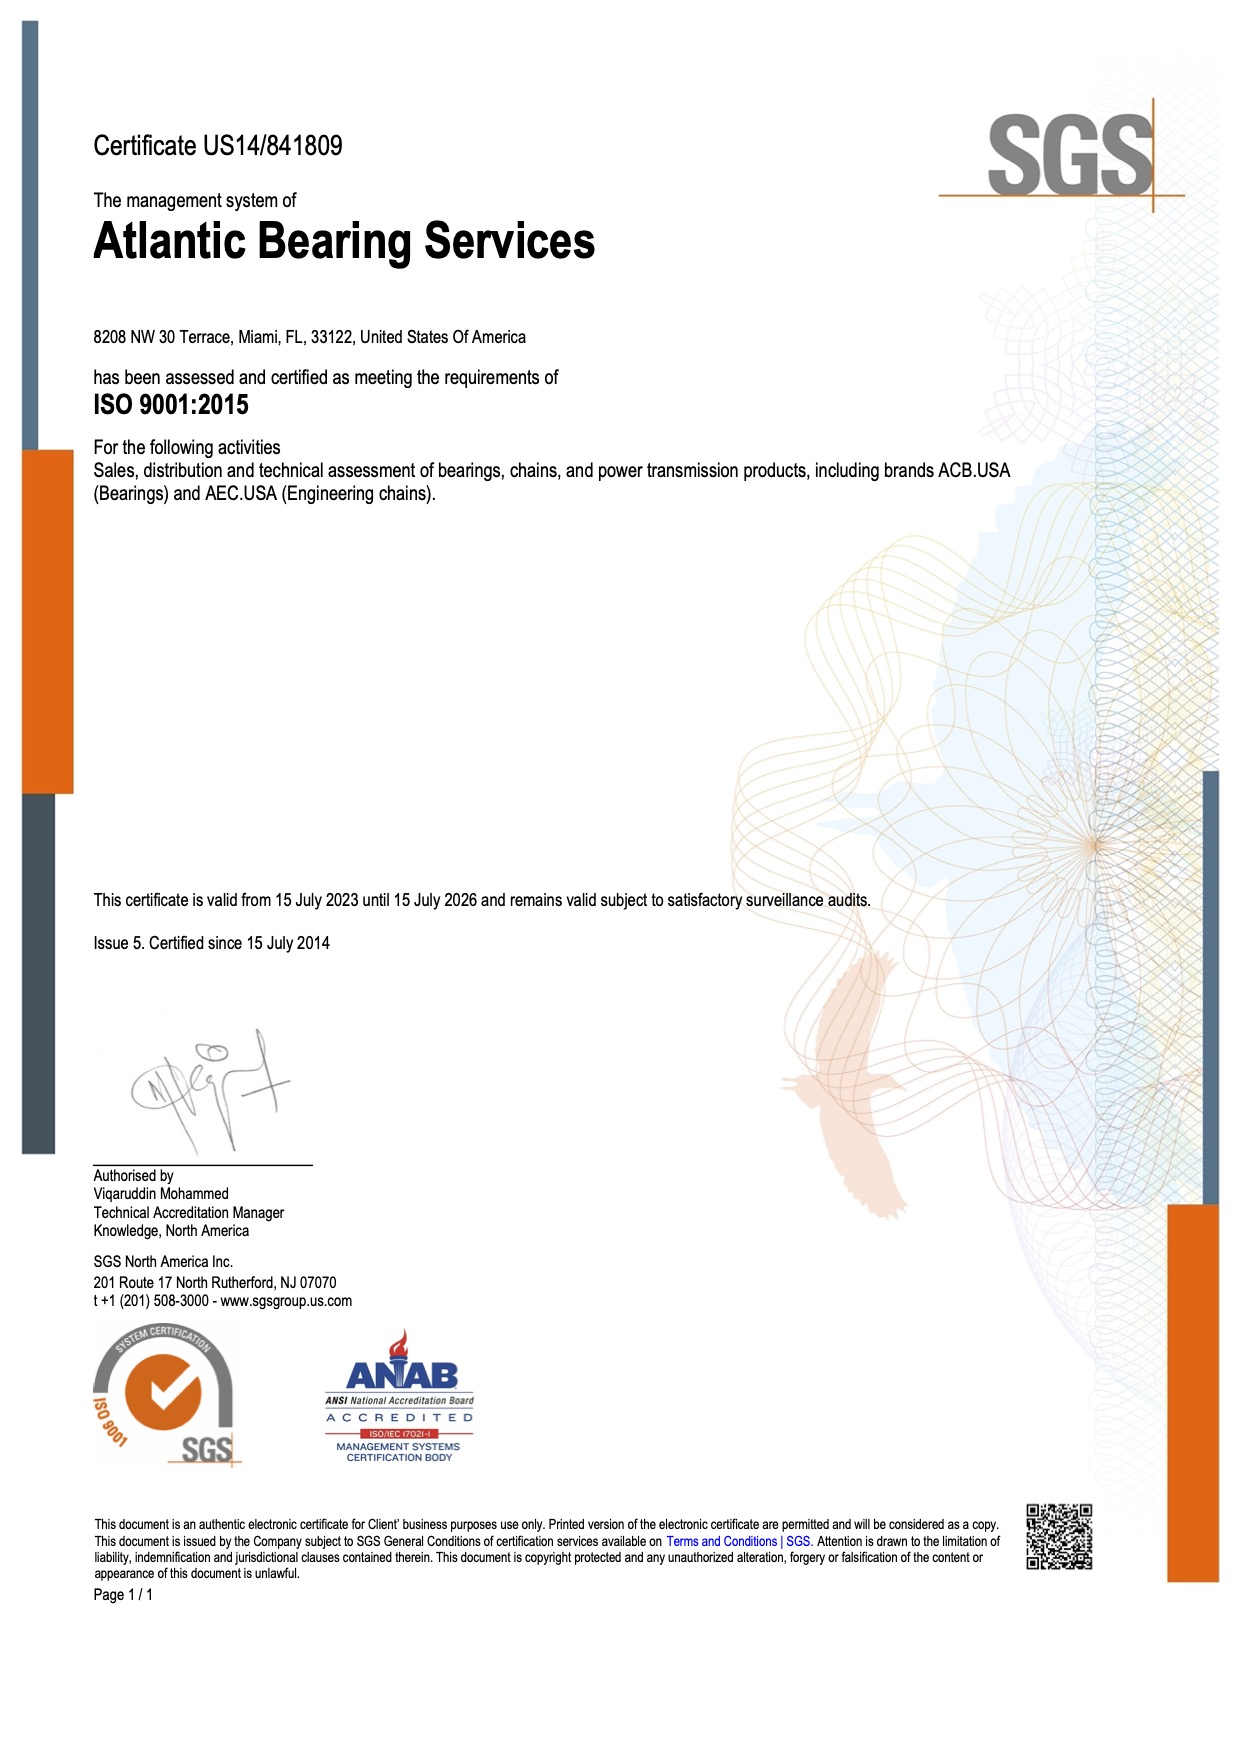 ISO 9001:2015 ABS Atlantic Bearing Services